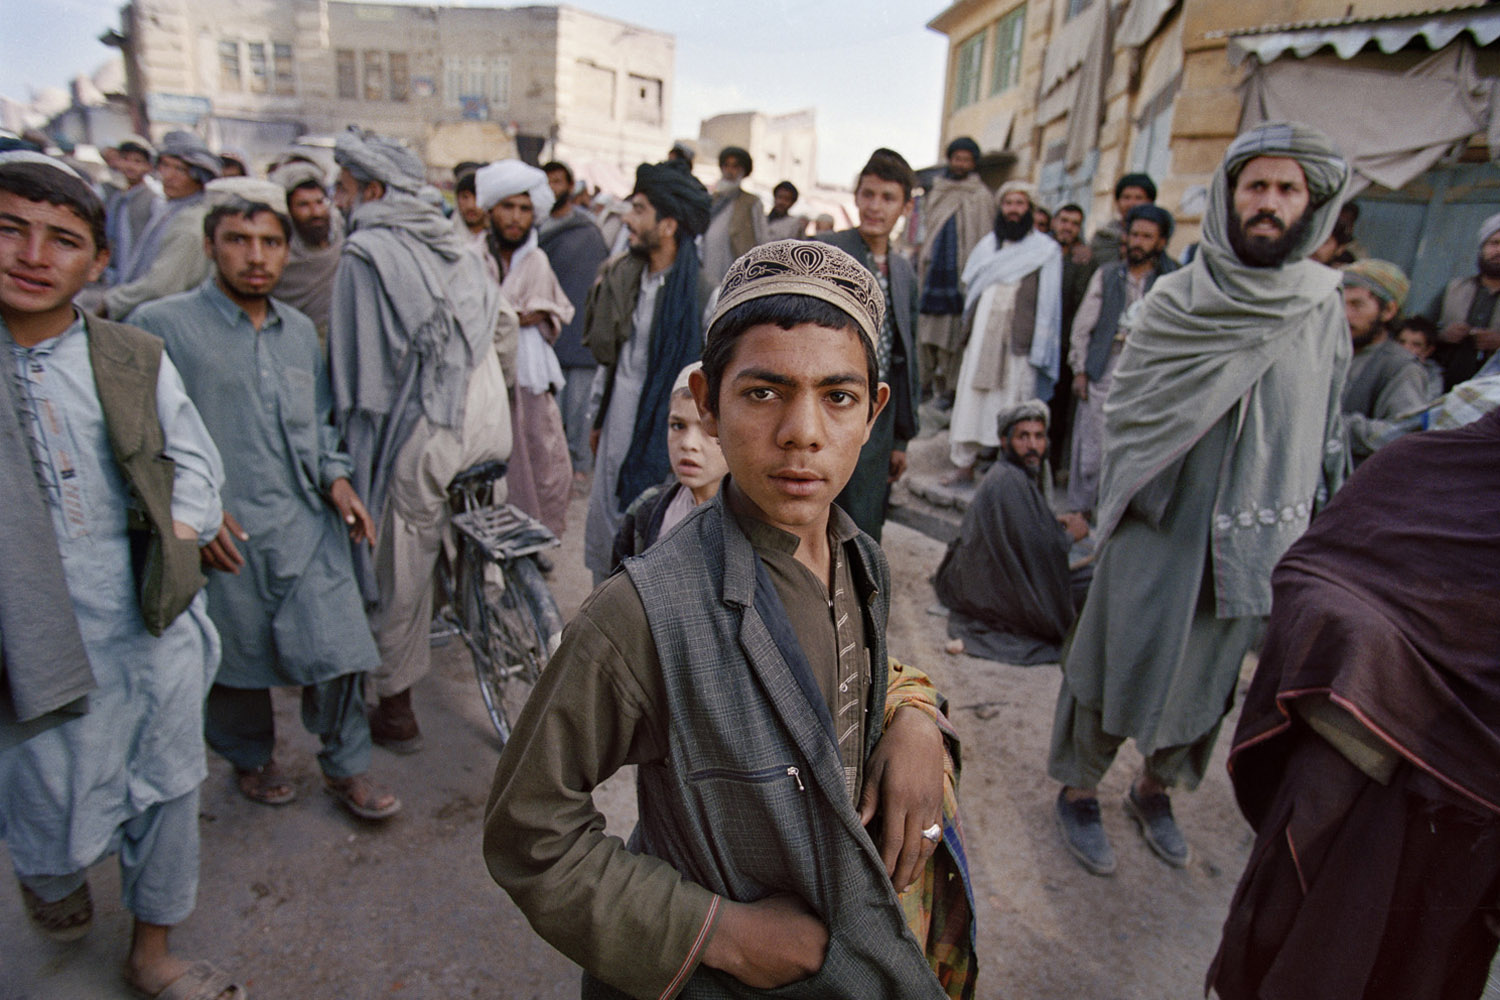 Local residents and Taliban gaze at a group of foreign journalists crossing through a central market following ten days of US airstrikes on city of Kandahar. November, 2001